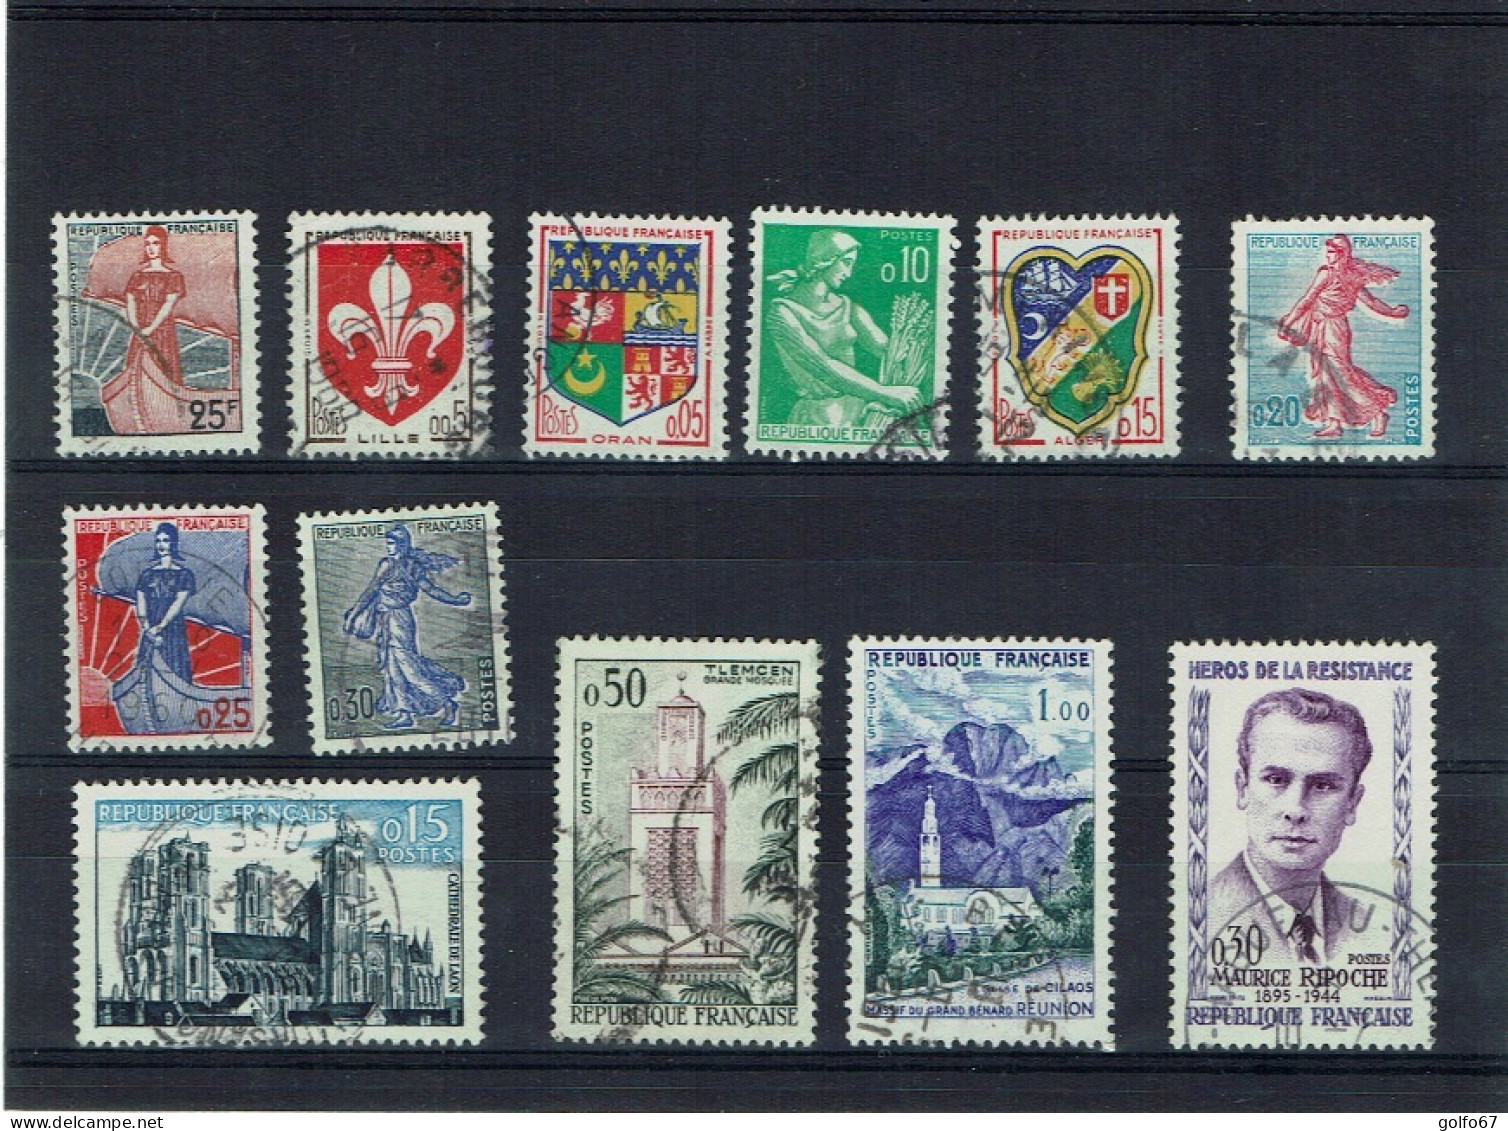 FRANCE - 1959 à 1960 Y&T N° 1216 - 1230 à 1234A - 1235 - 1238 - 1241 - 1250 Oblit (0114) - Used Stamps